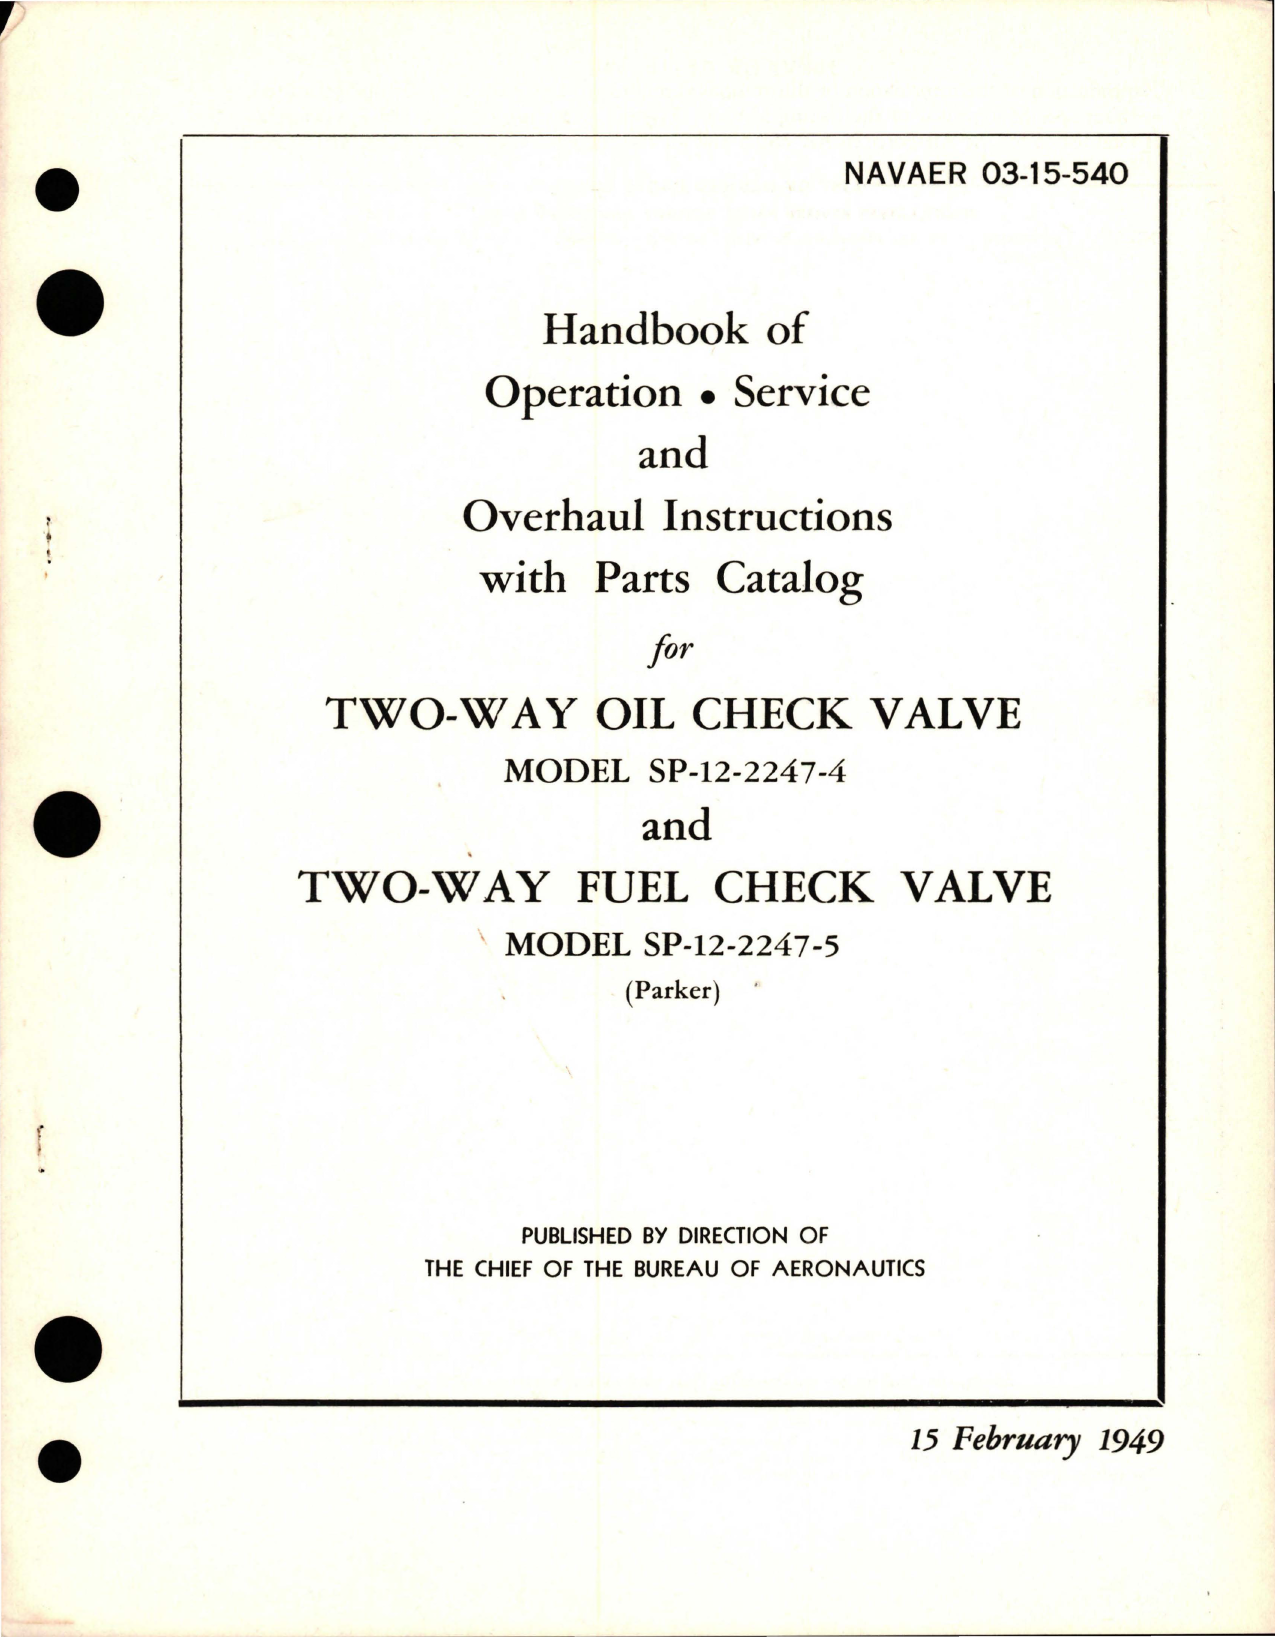 Sample page 1 from AirCorps Library document: Operation, Service, Overhaul Instructions with Parts for Two Way Oil Check Valve - SP-12-2247-4, and Two Way Fuel Check Valve - SP-12-2247-5